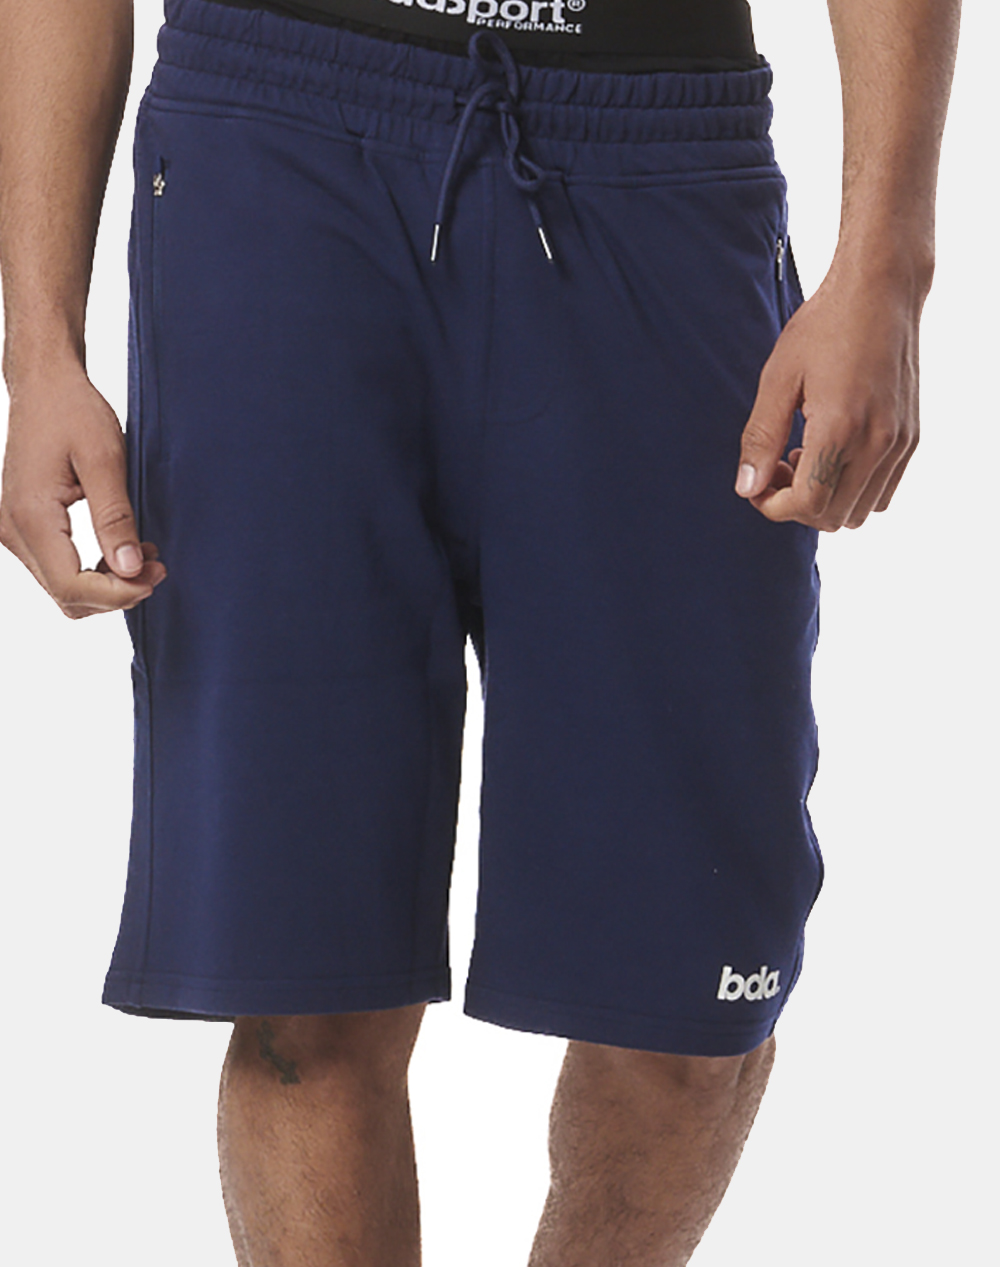 BODY ACTION MEN”S ESENTIAL SPORT SHORTS W/ZIPPERS 033416-01-PEACOAT BLUE Blue 3820PBODY2300041_6635